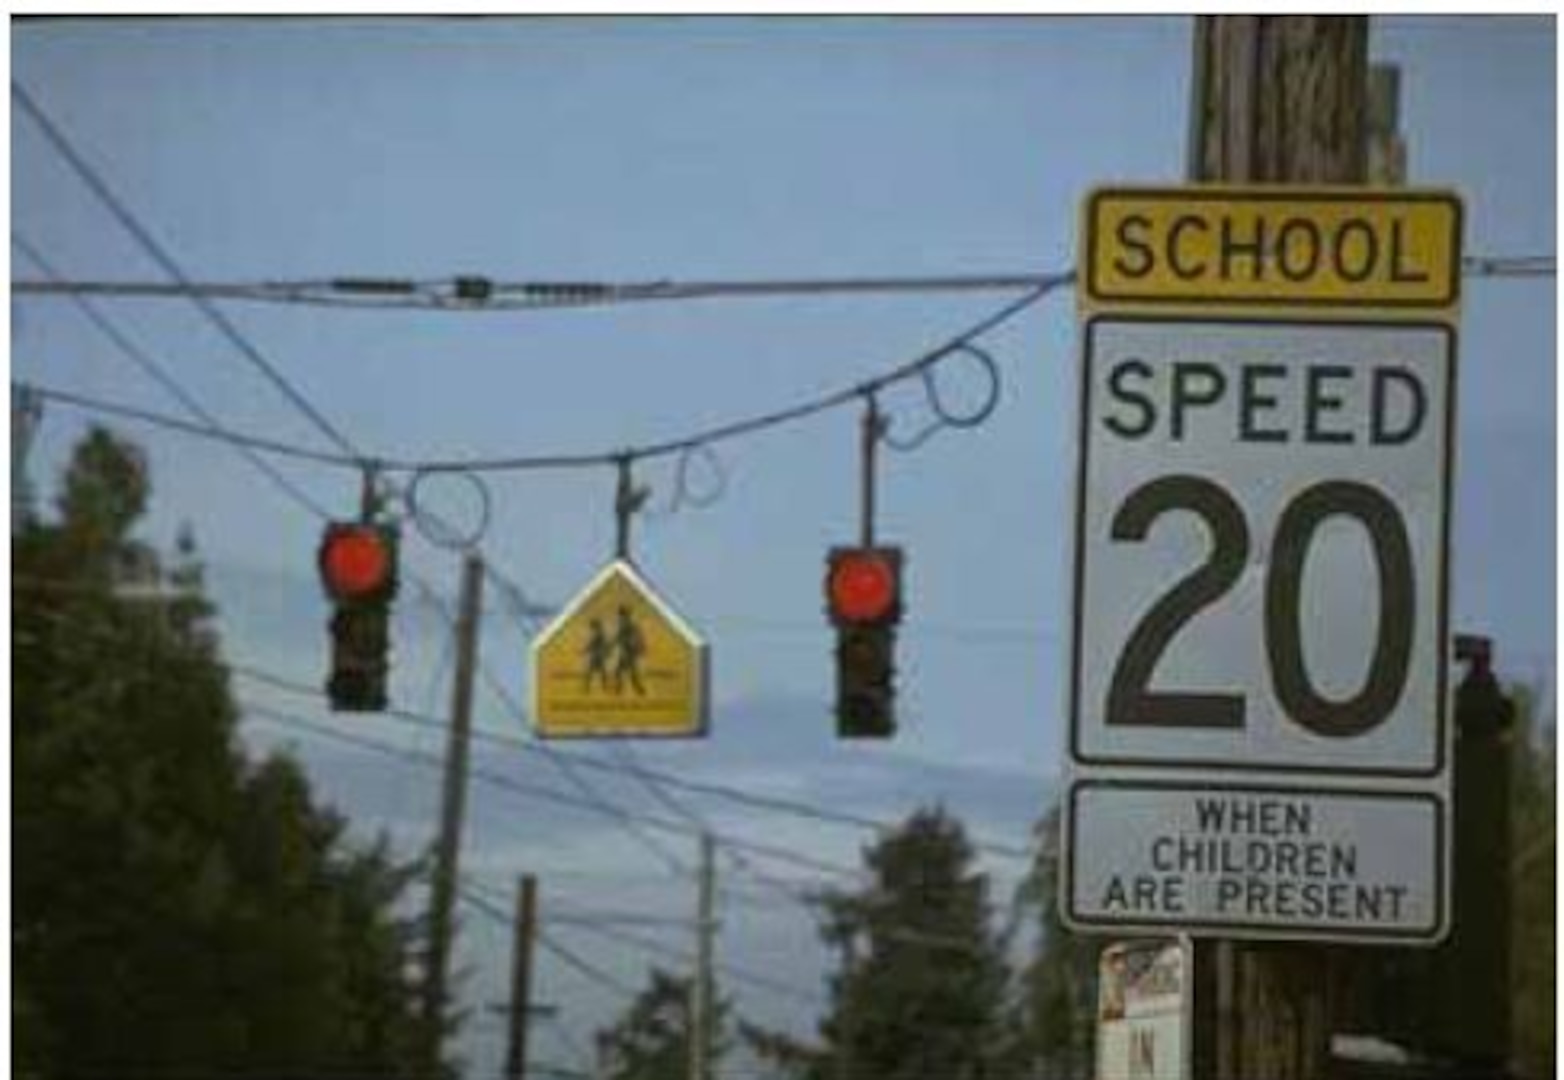 Vehicle drivers must be observant and obey all speed limits, traffic signs, crossing guards, and other signals including those on school transport vehicles to promote safety within a school or child safety zone.